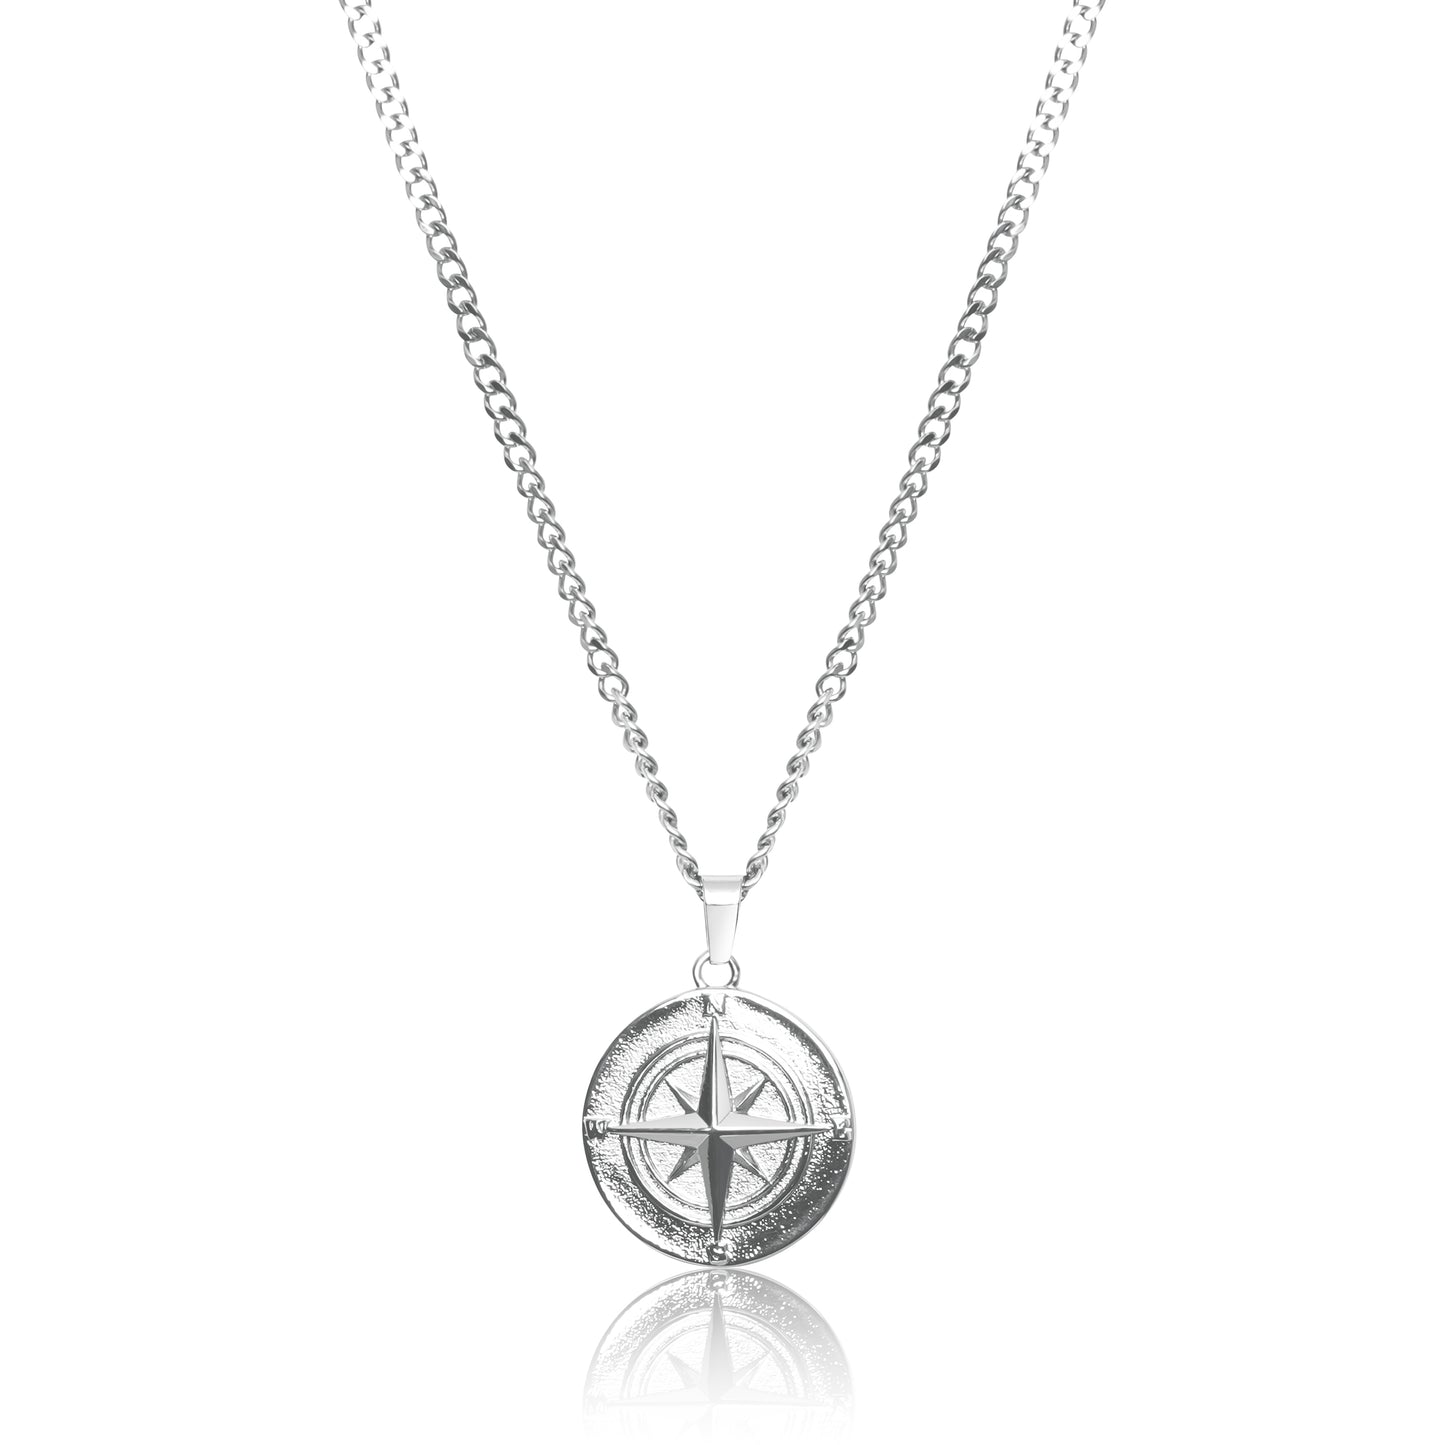 Compass Pendant Necklace - Silver / Gold